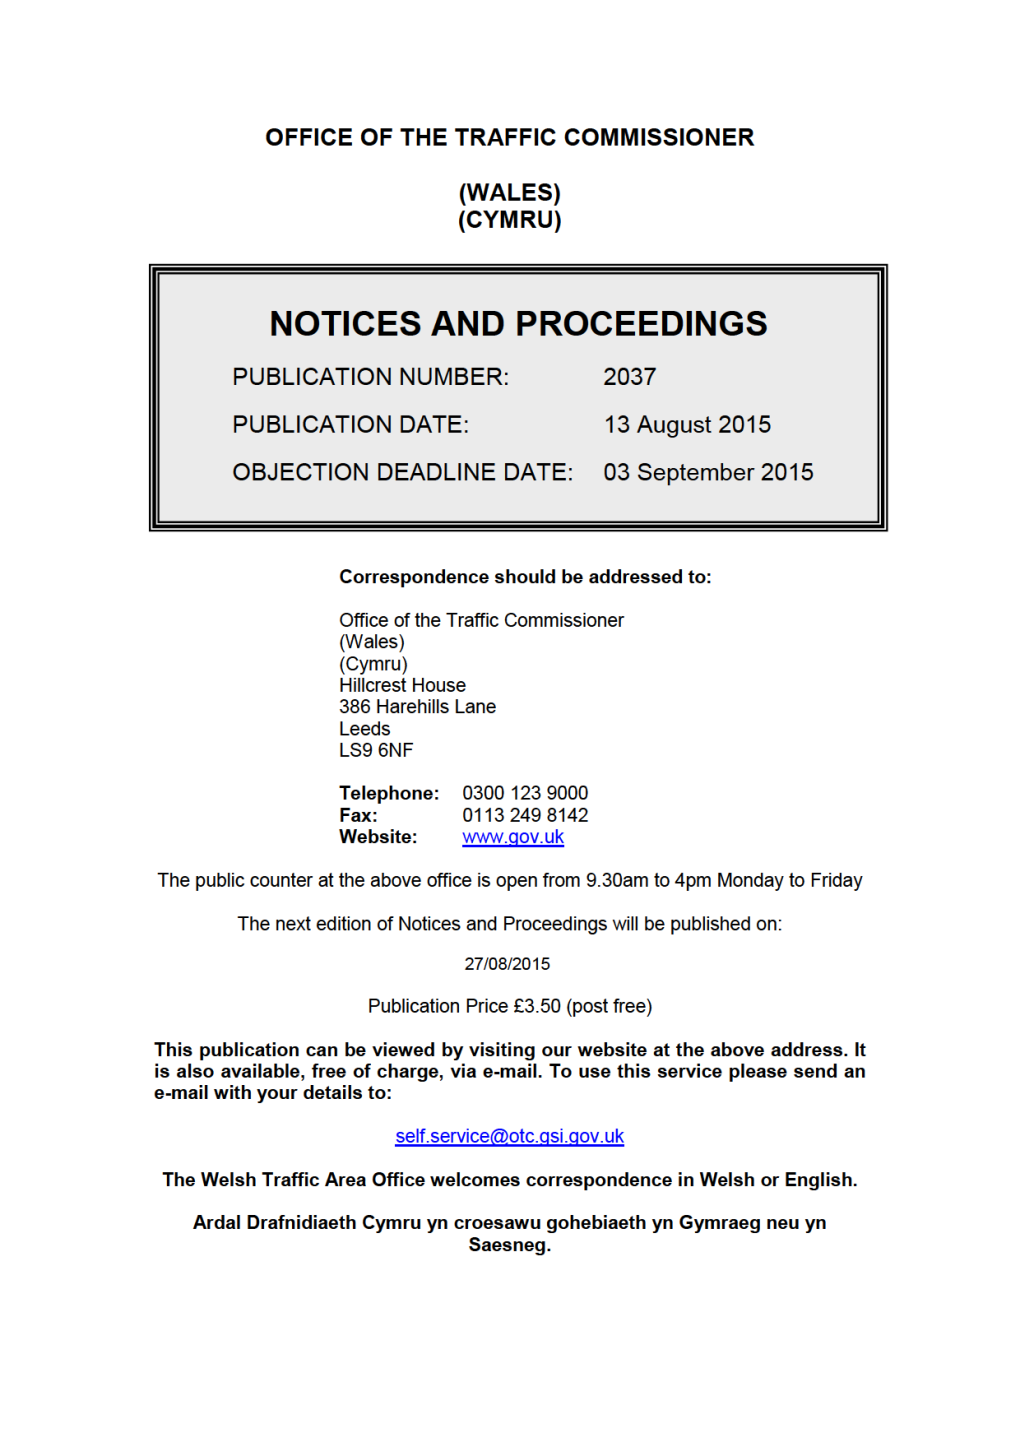 NOTICES and PROCEEDINGS 13 August 2015